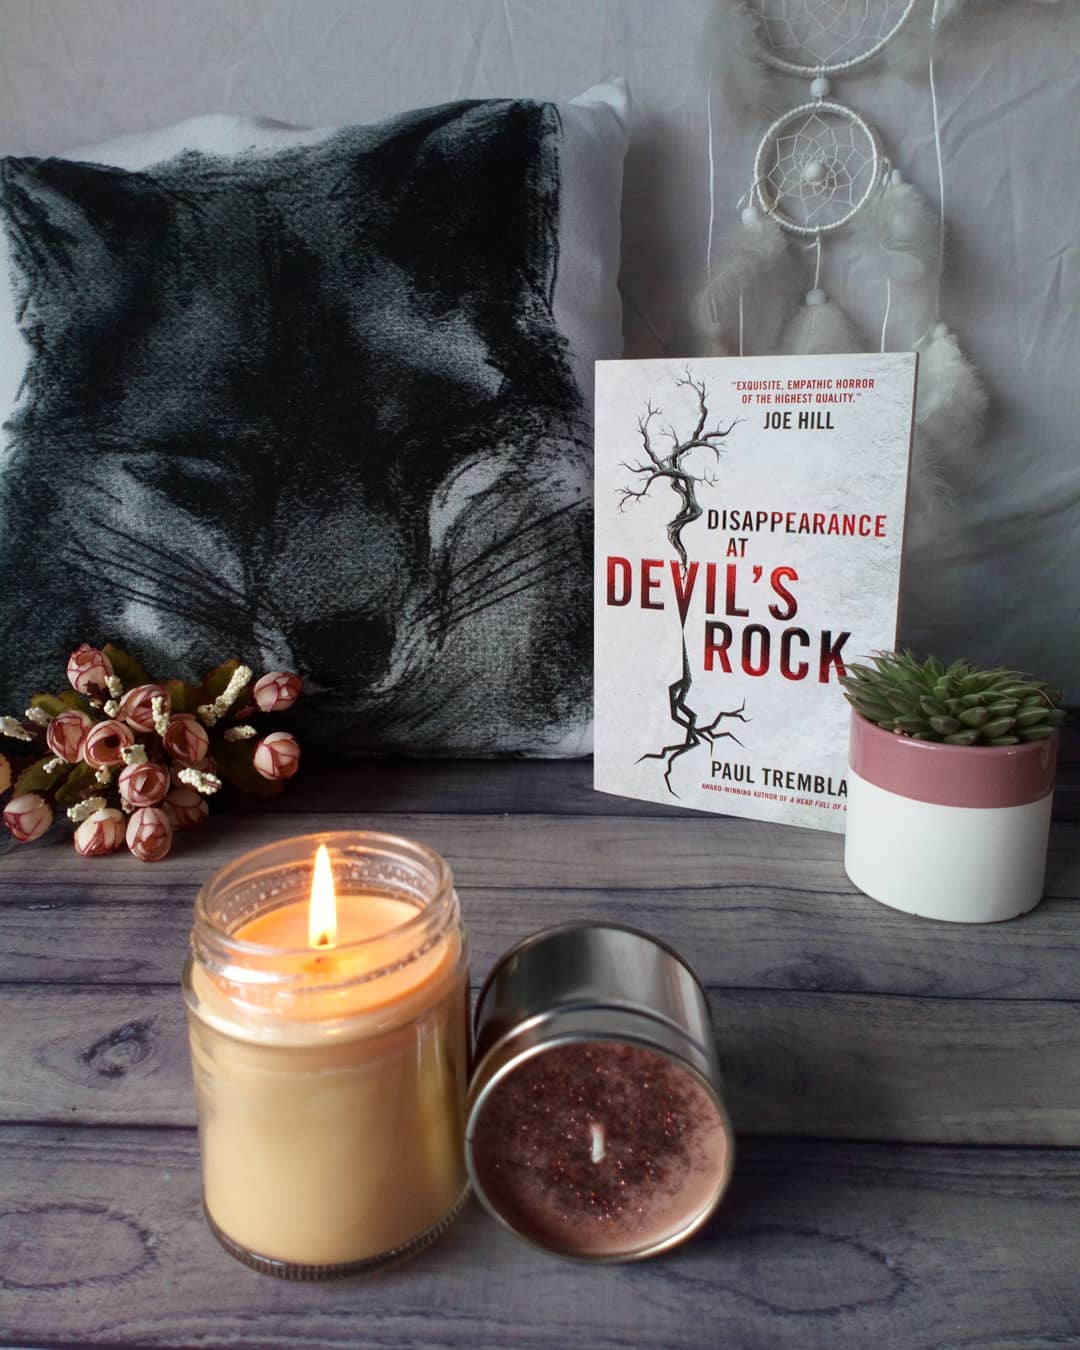 DISAPPEARANCE AT DEVIL’S ROCK by Paul Tremblay